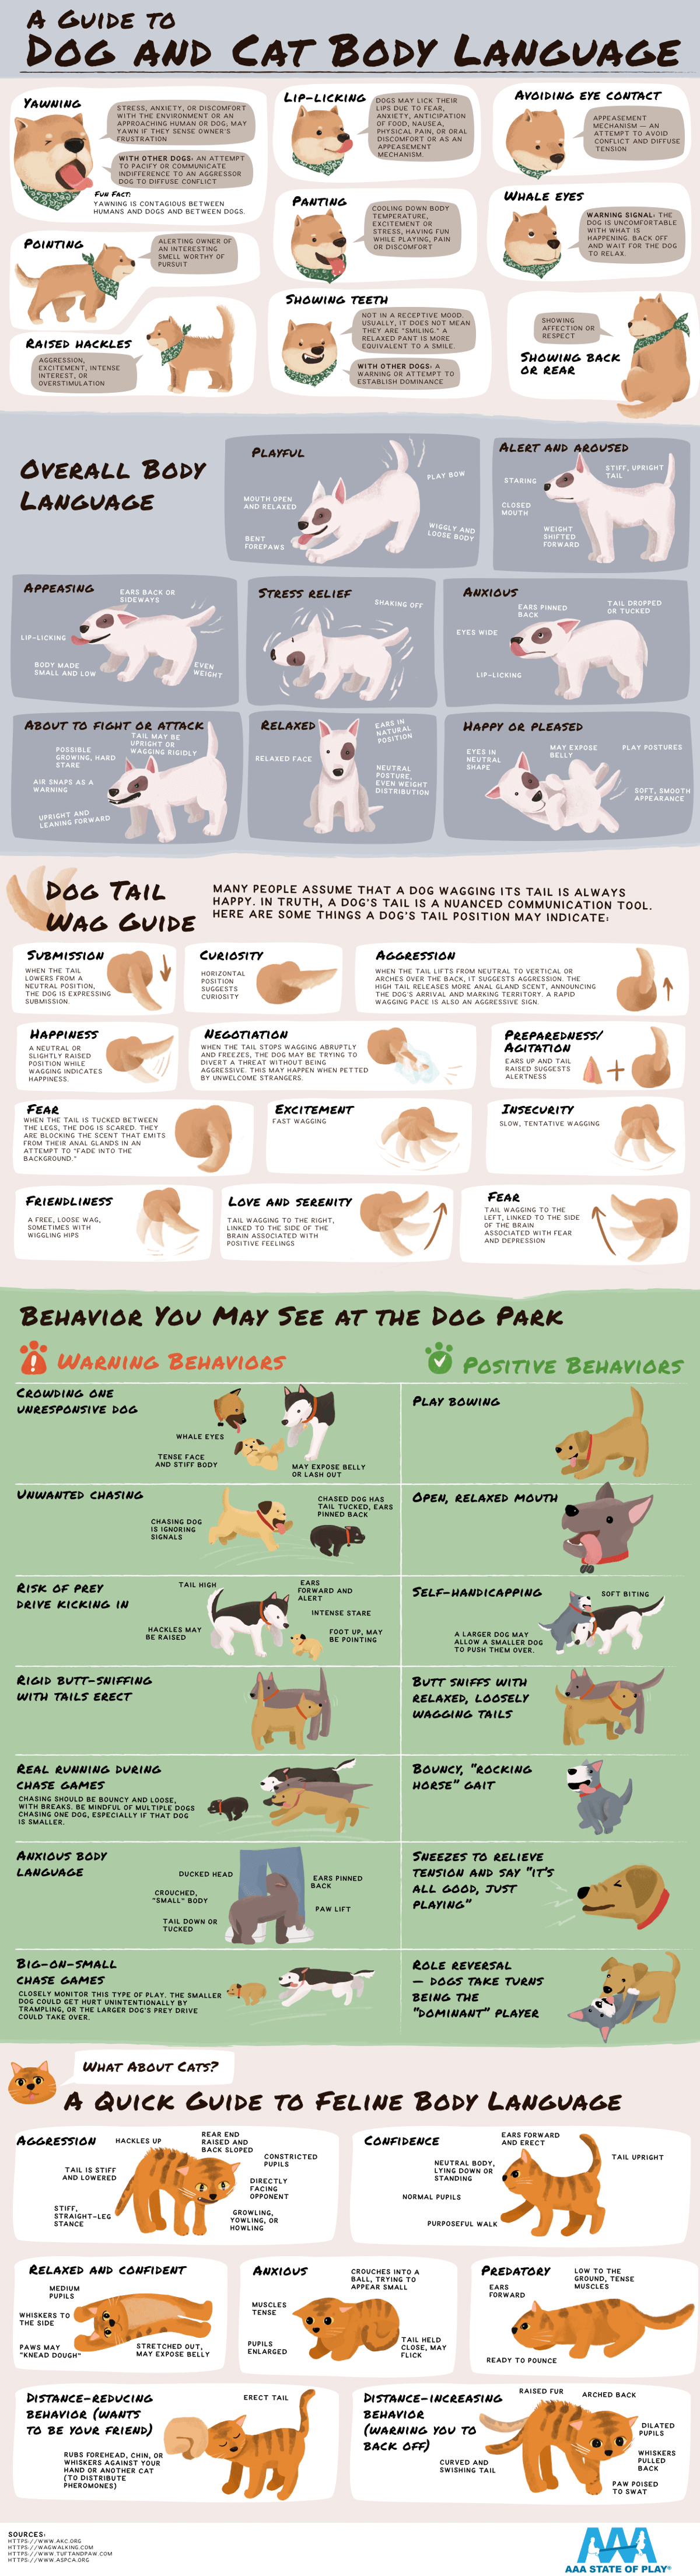 Guide to Cat and Dog Body Language